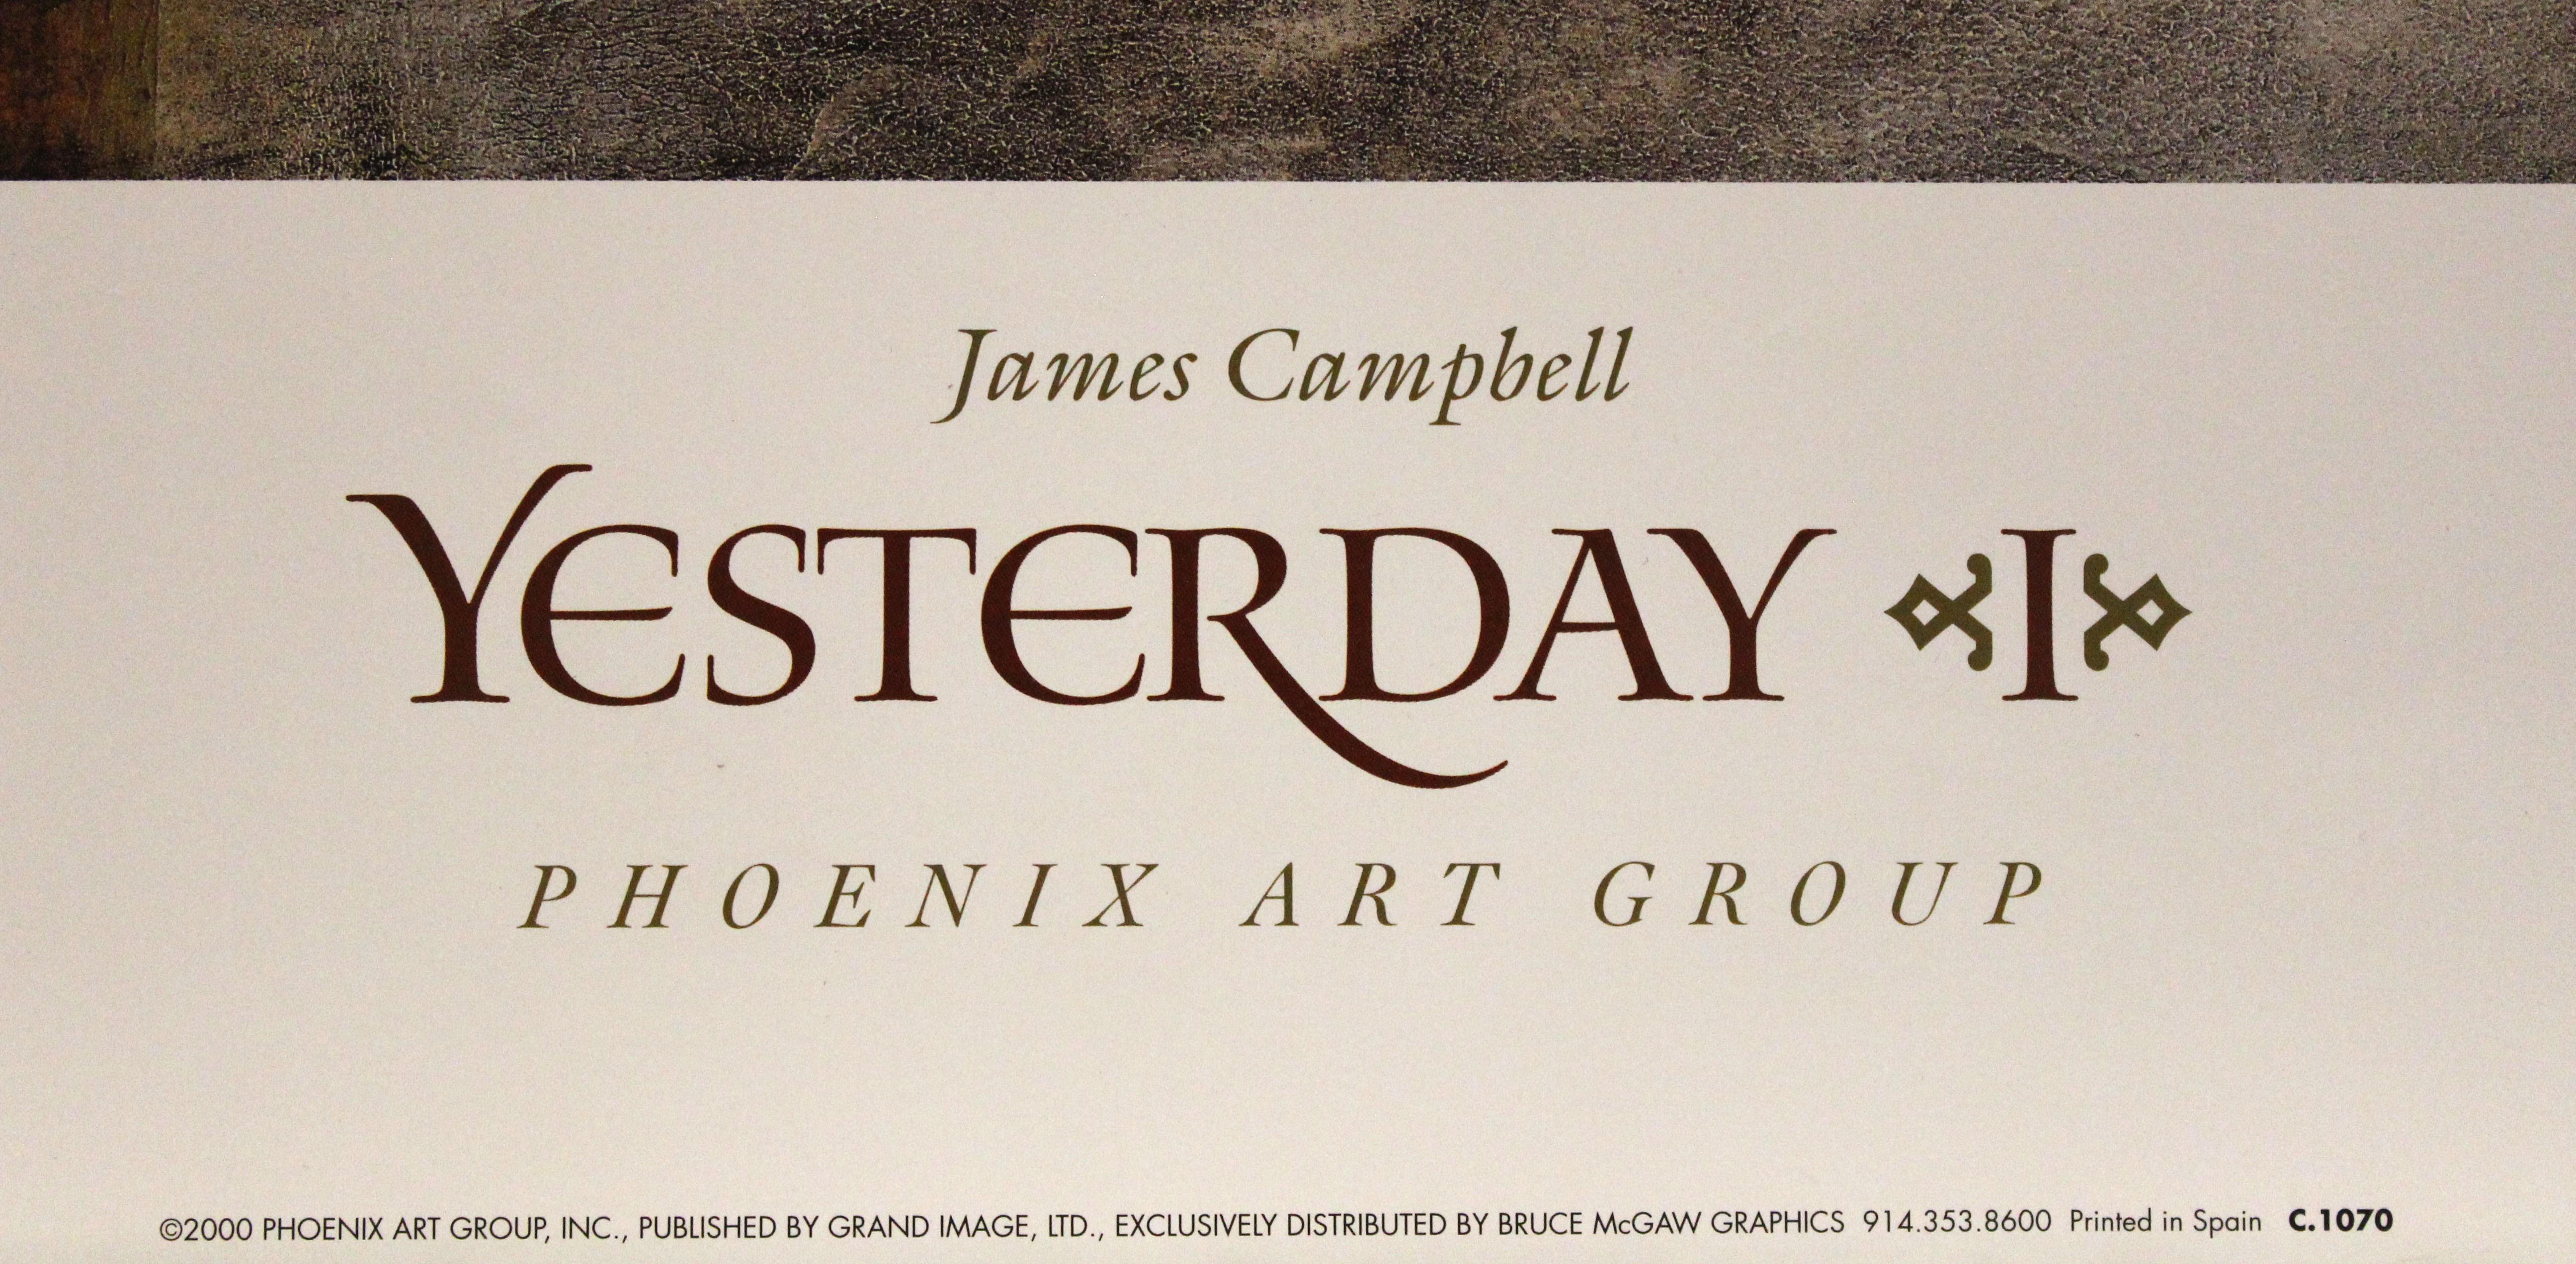 Yesterday I-Poster. Phoenix Art Group - Print by James Campbell